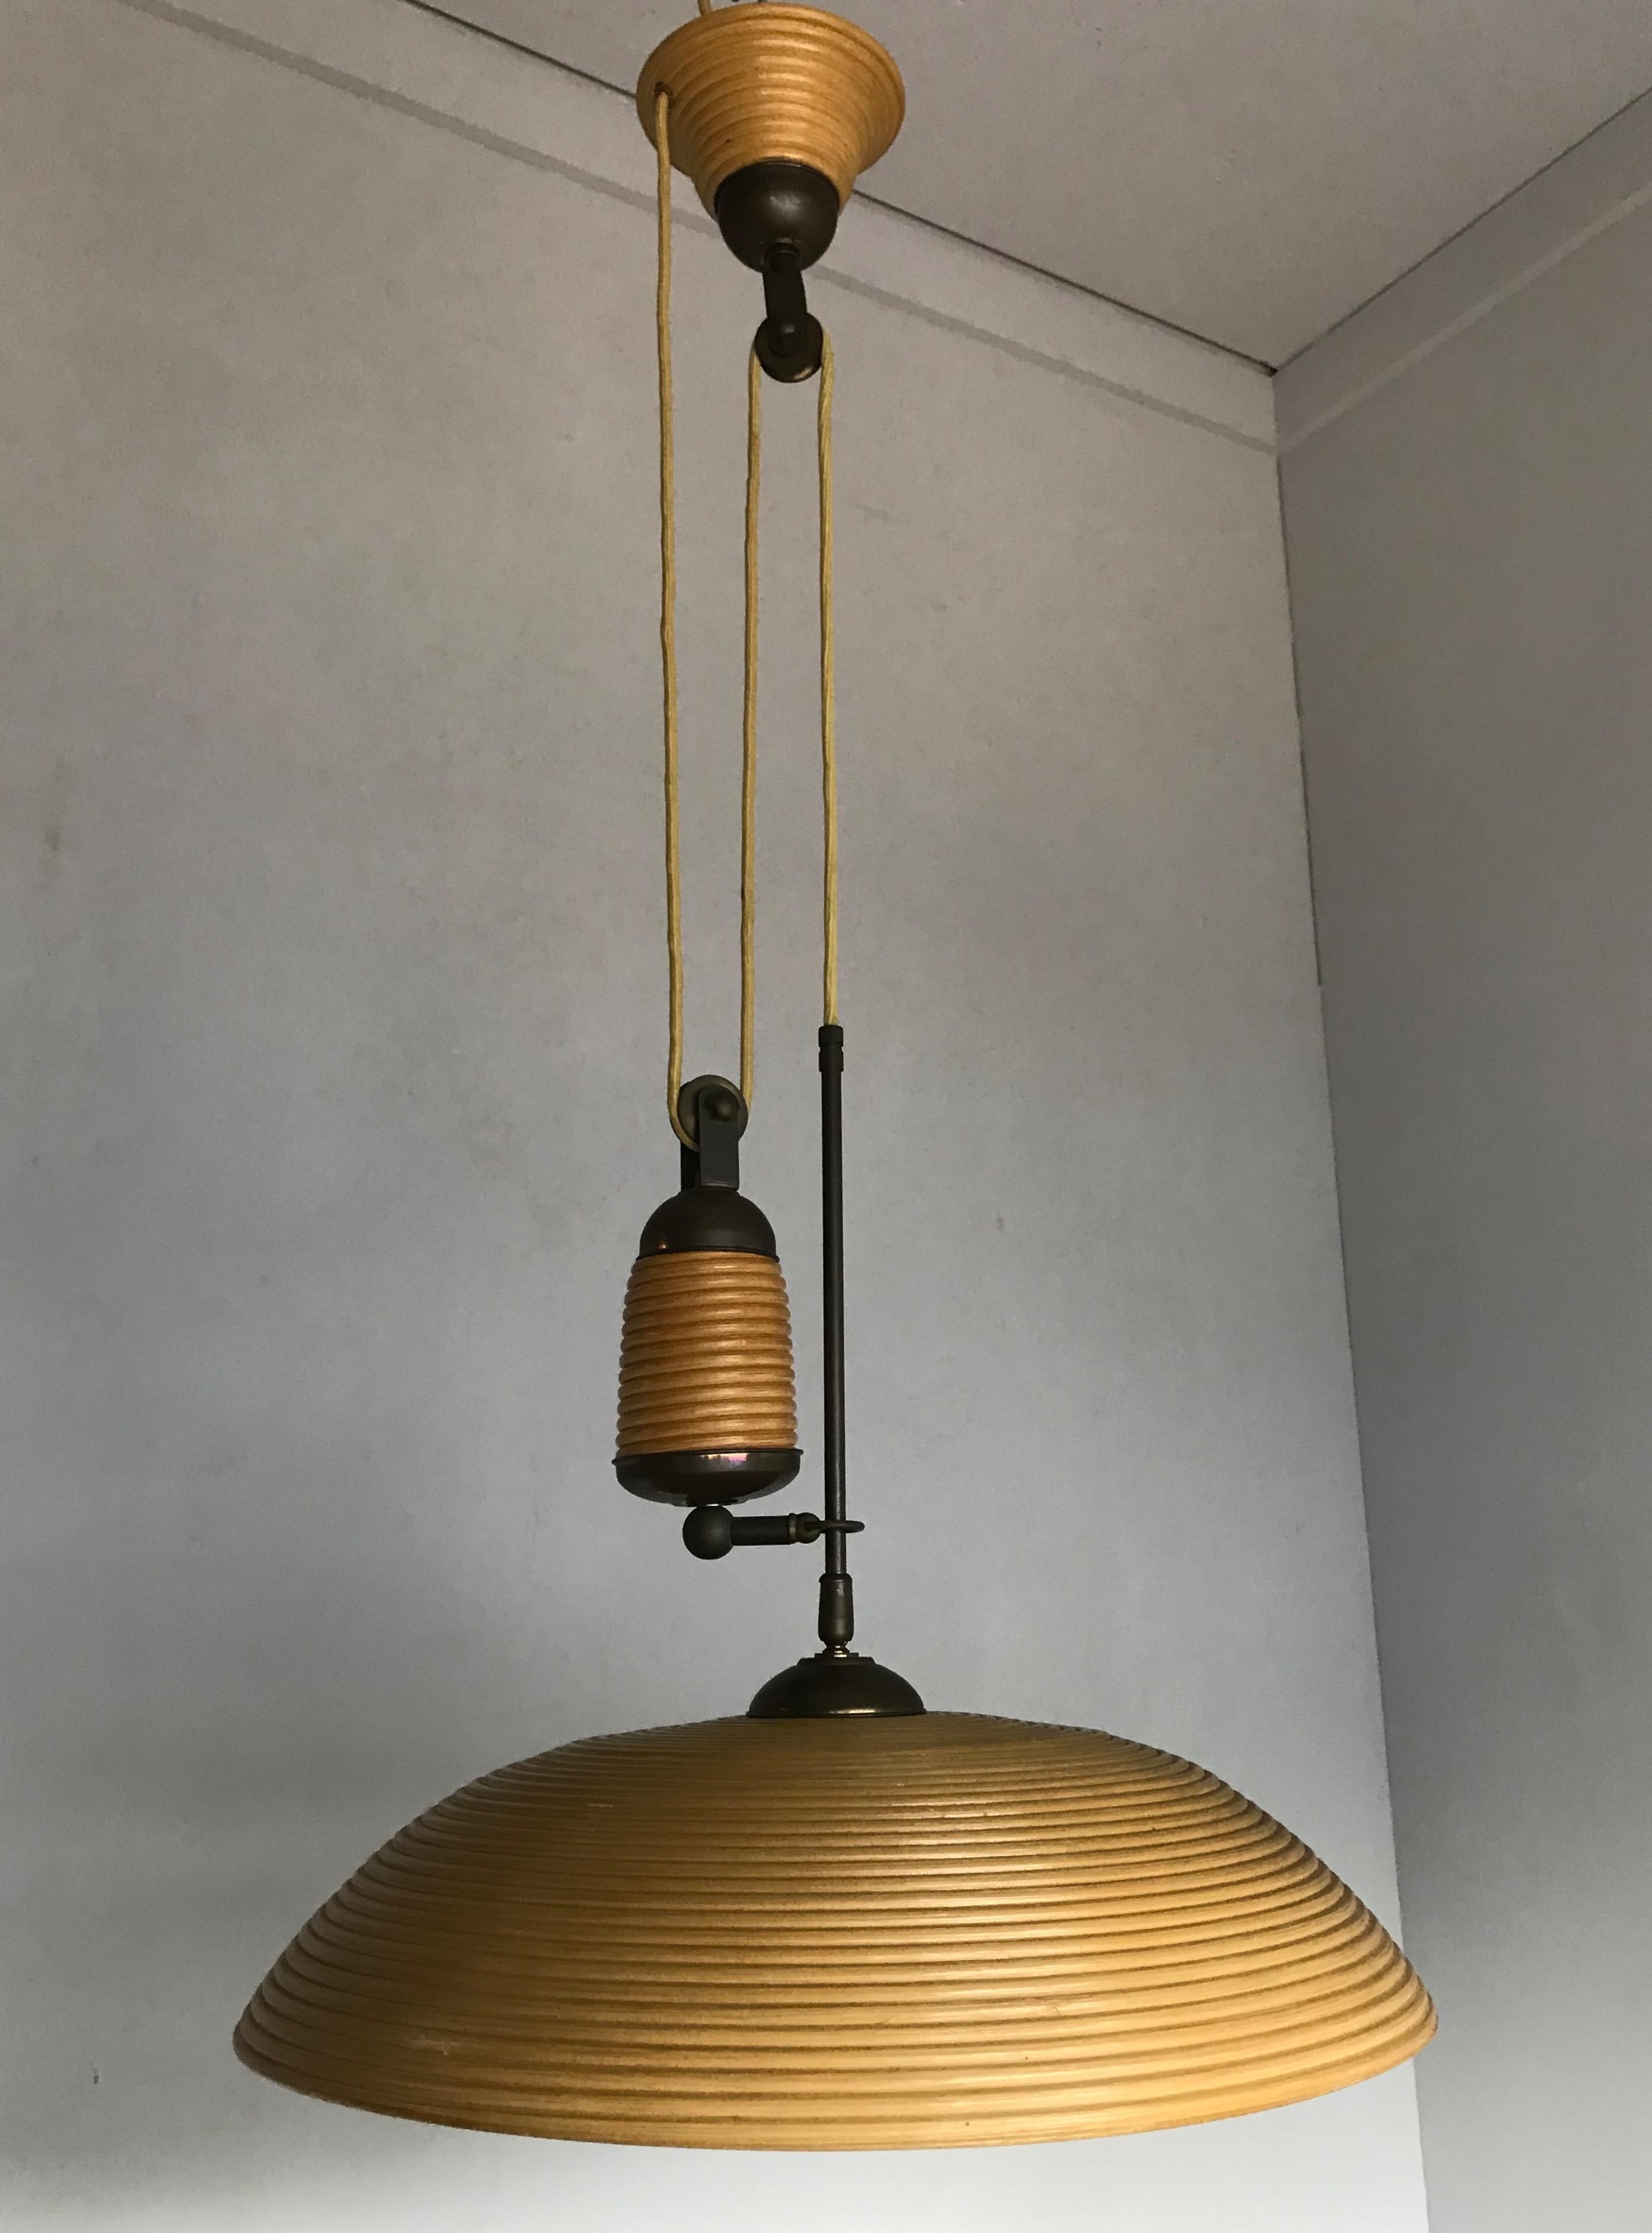 Rare and Handcrafted Mid-Century Modern Rattan and Brass Pendant Light, Lamp 10